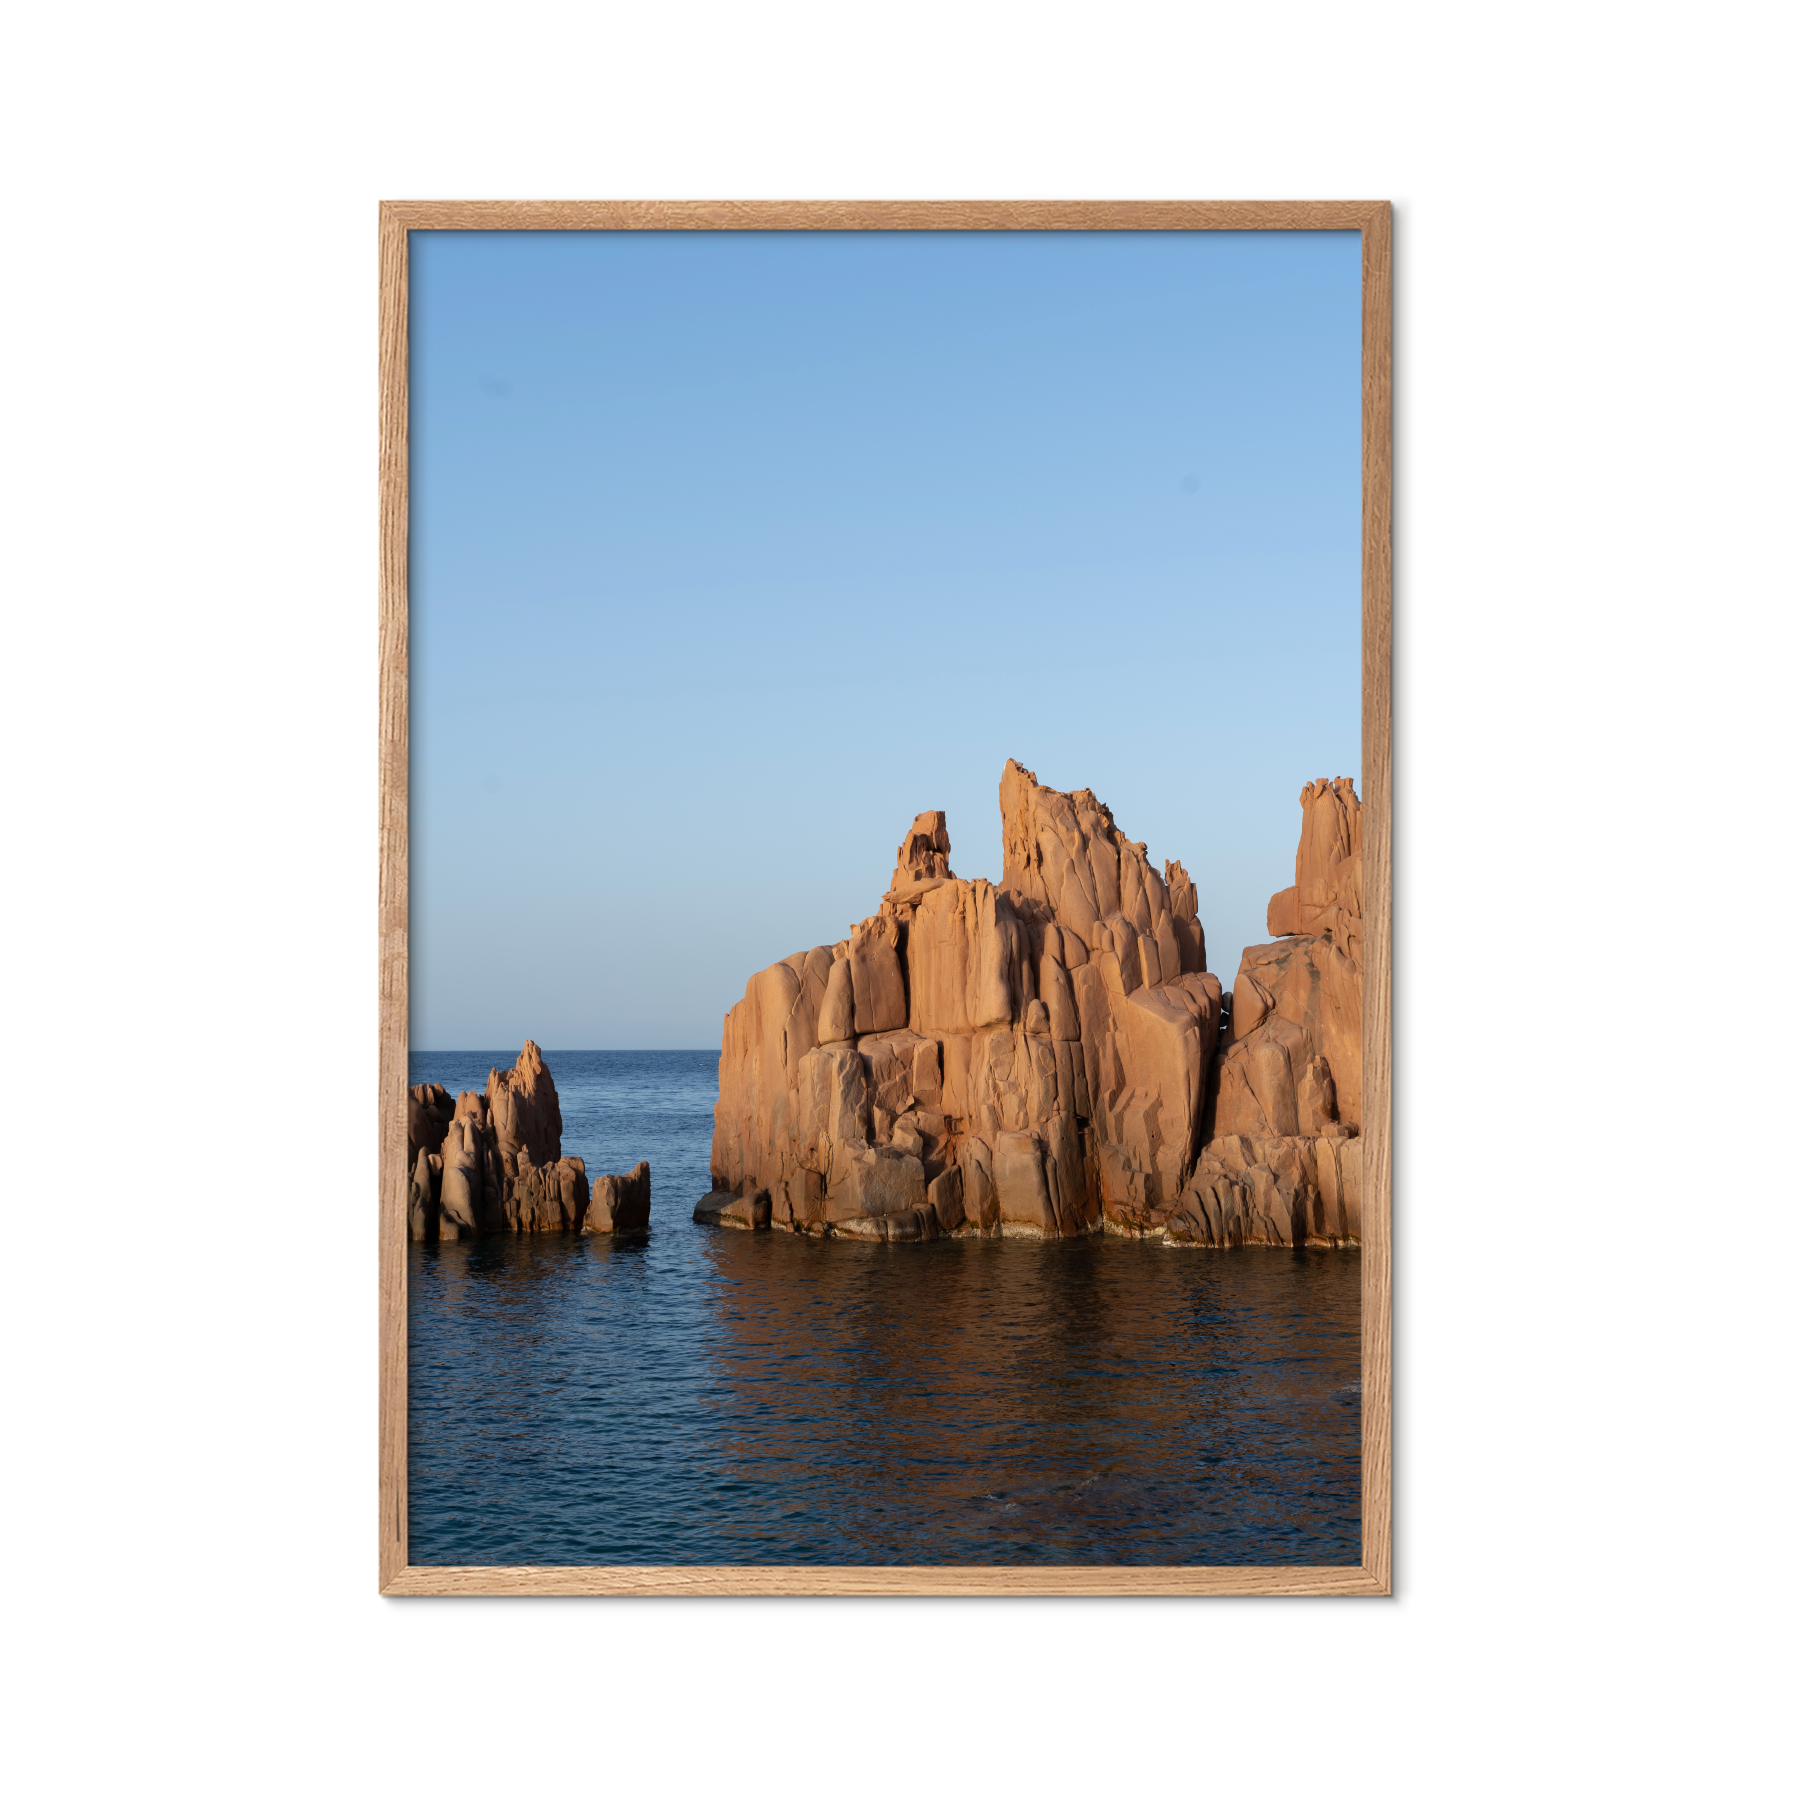 Rocce Rosse